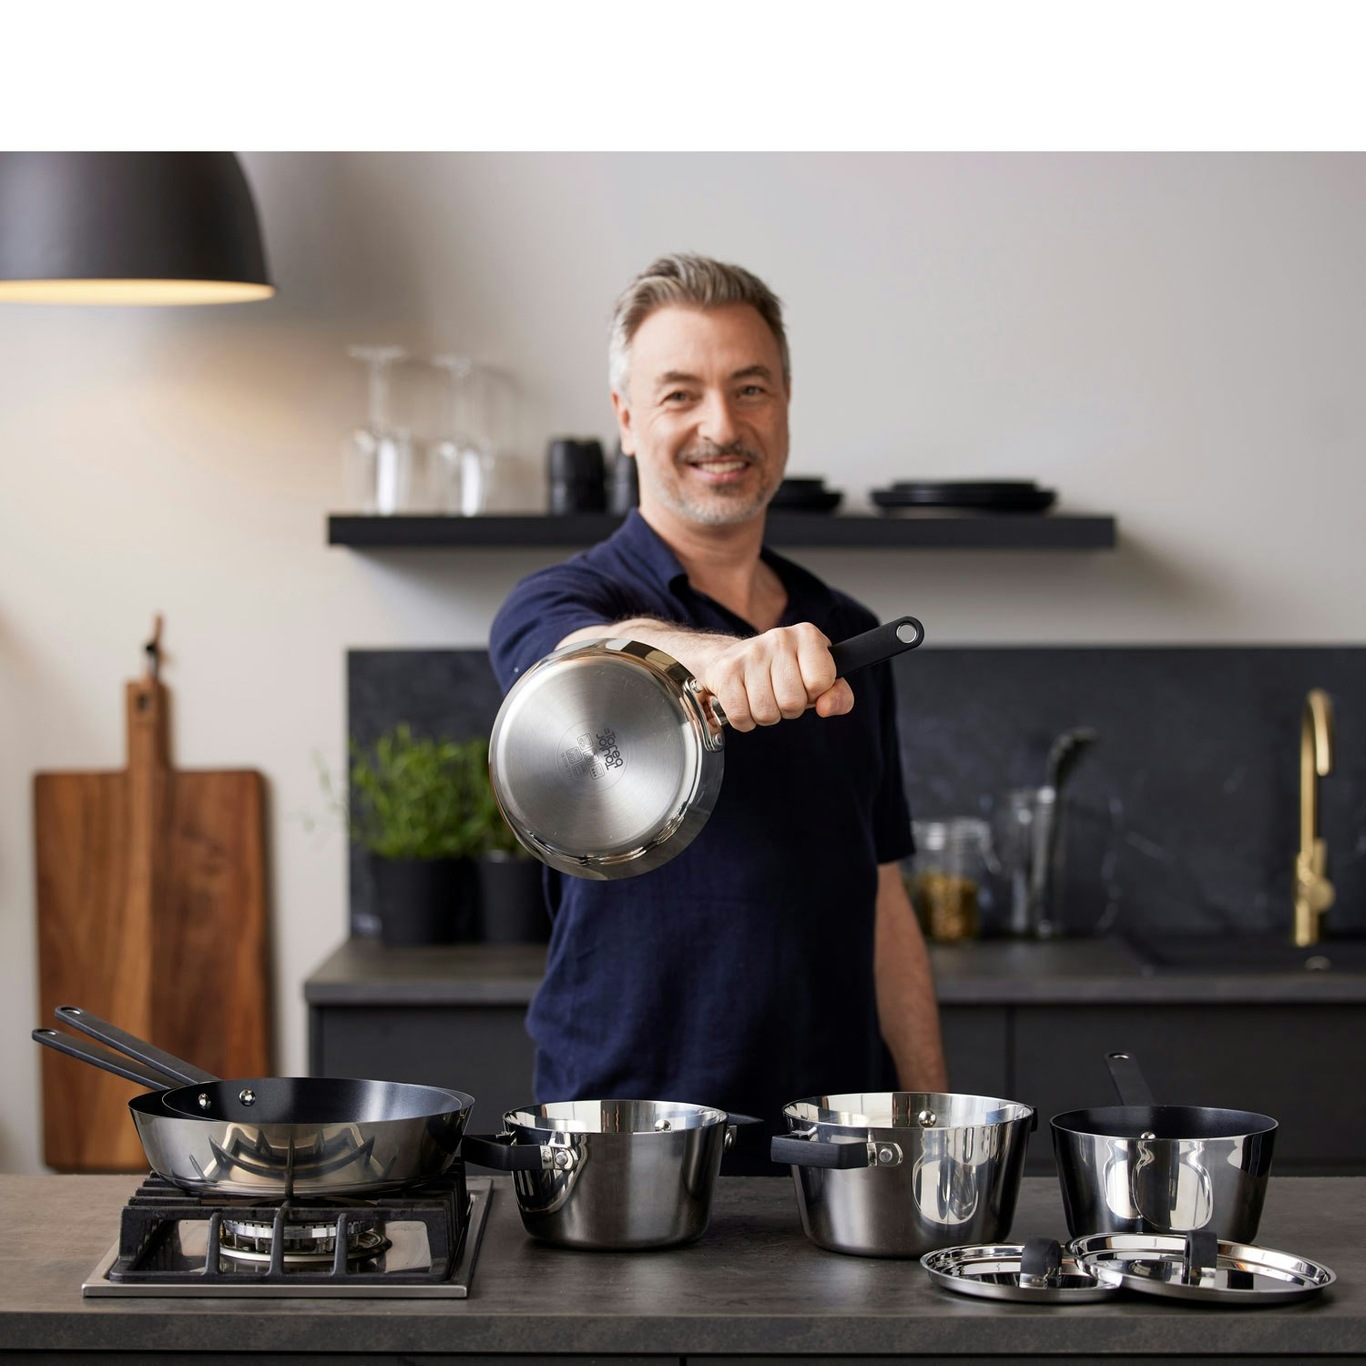 MasterClass Can-to-Pan 20cm Ceramic Non-Stick Saucepan with Lid in 2023